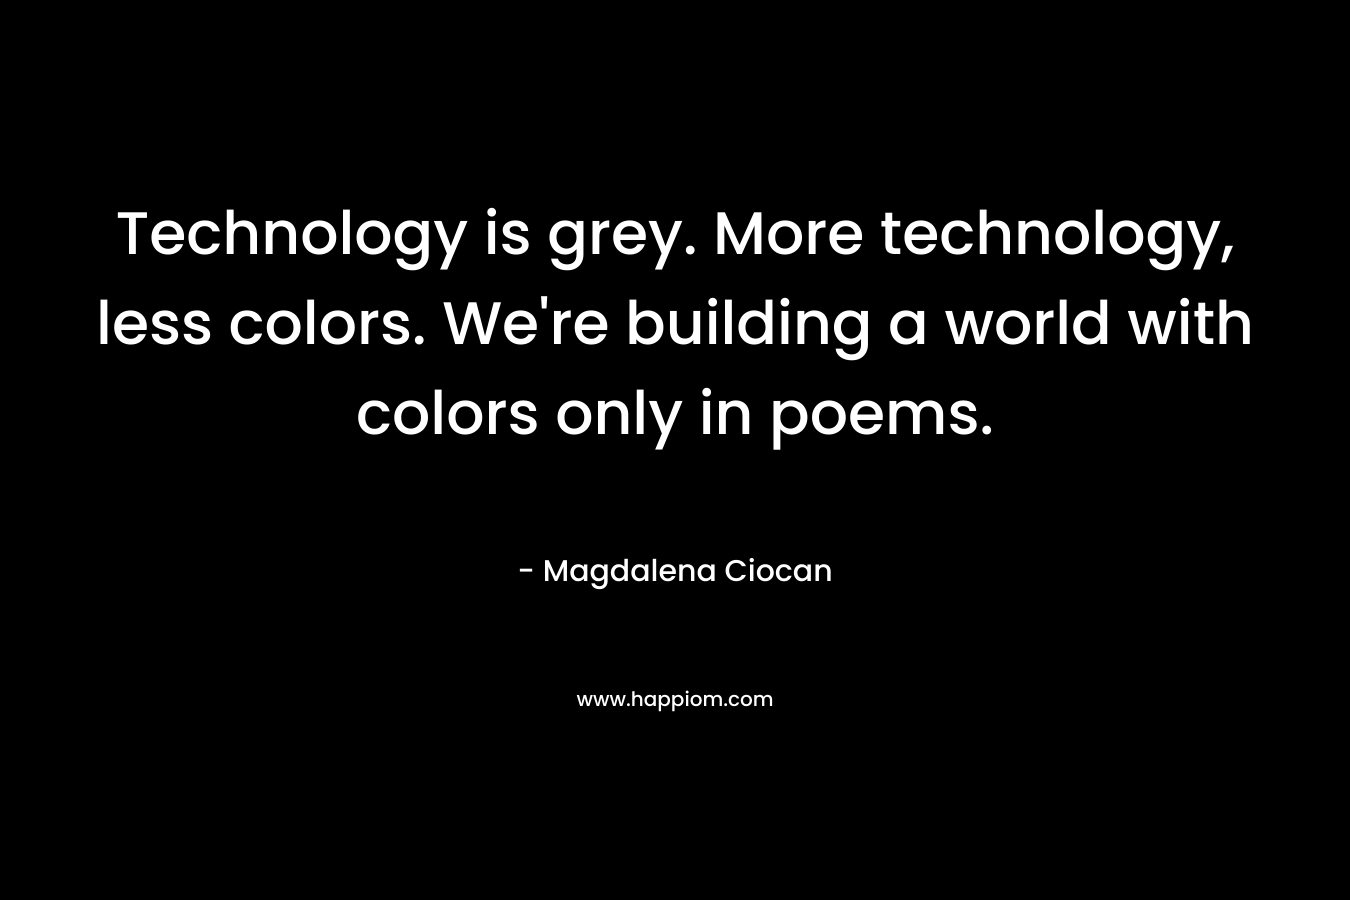 Technology is grey. More technology, less colors. We're building a world with colors only in poems.